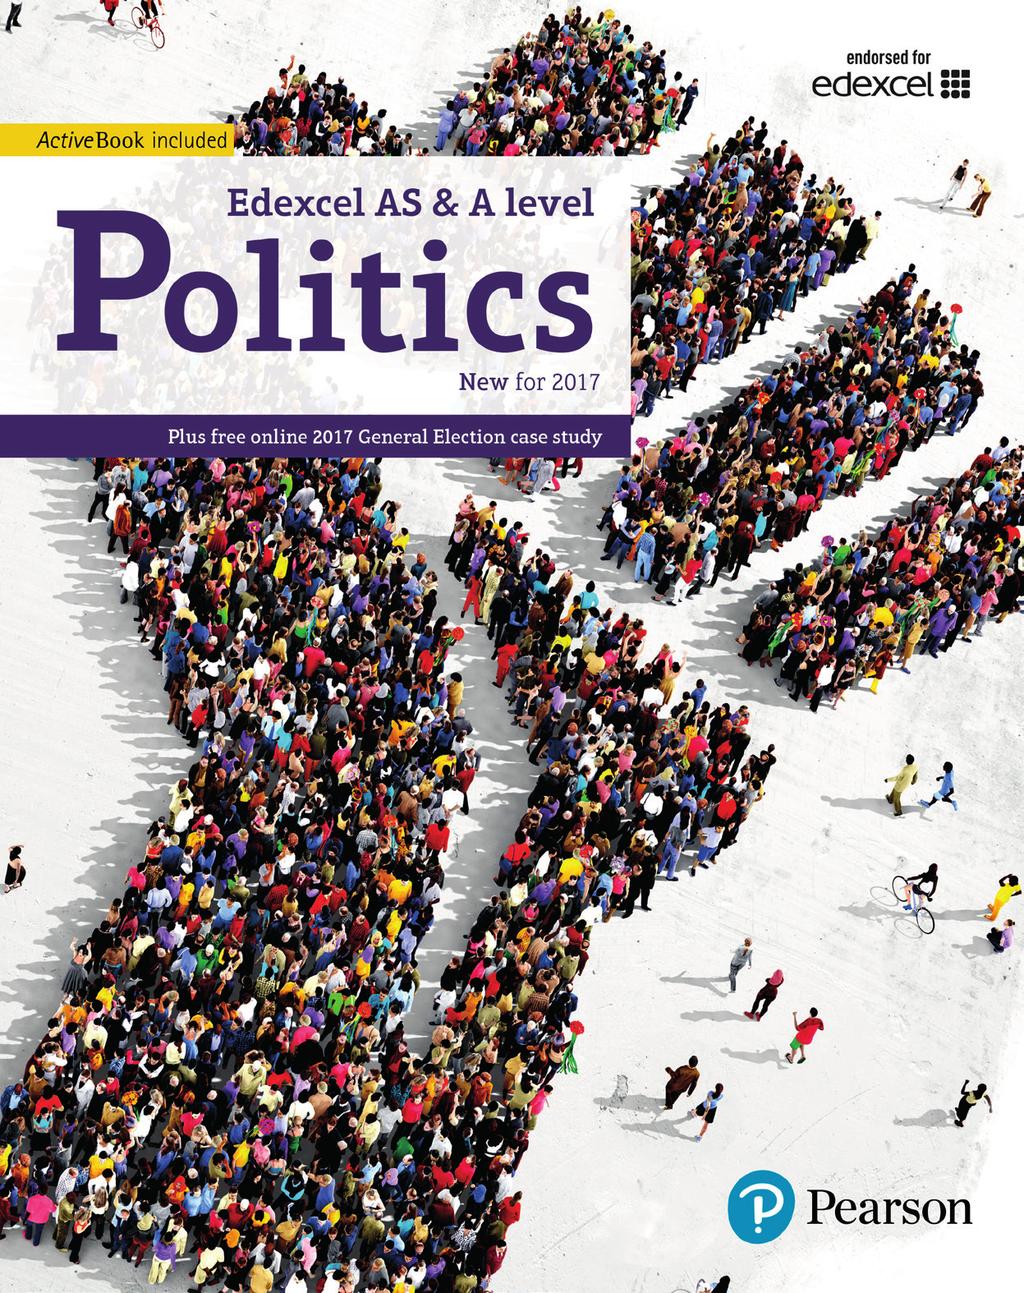 This case study is an online companion to the Pearson book Edexcel AS & A level Politics